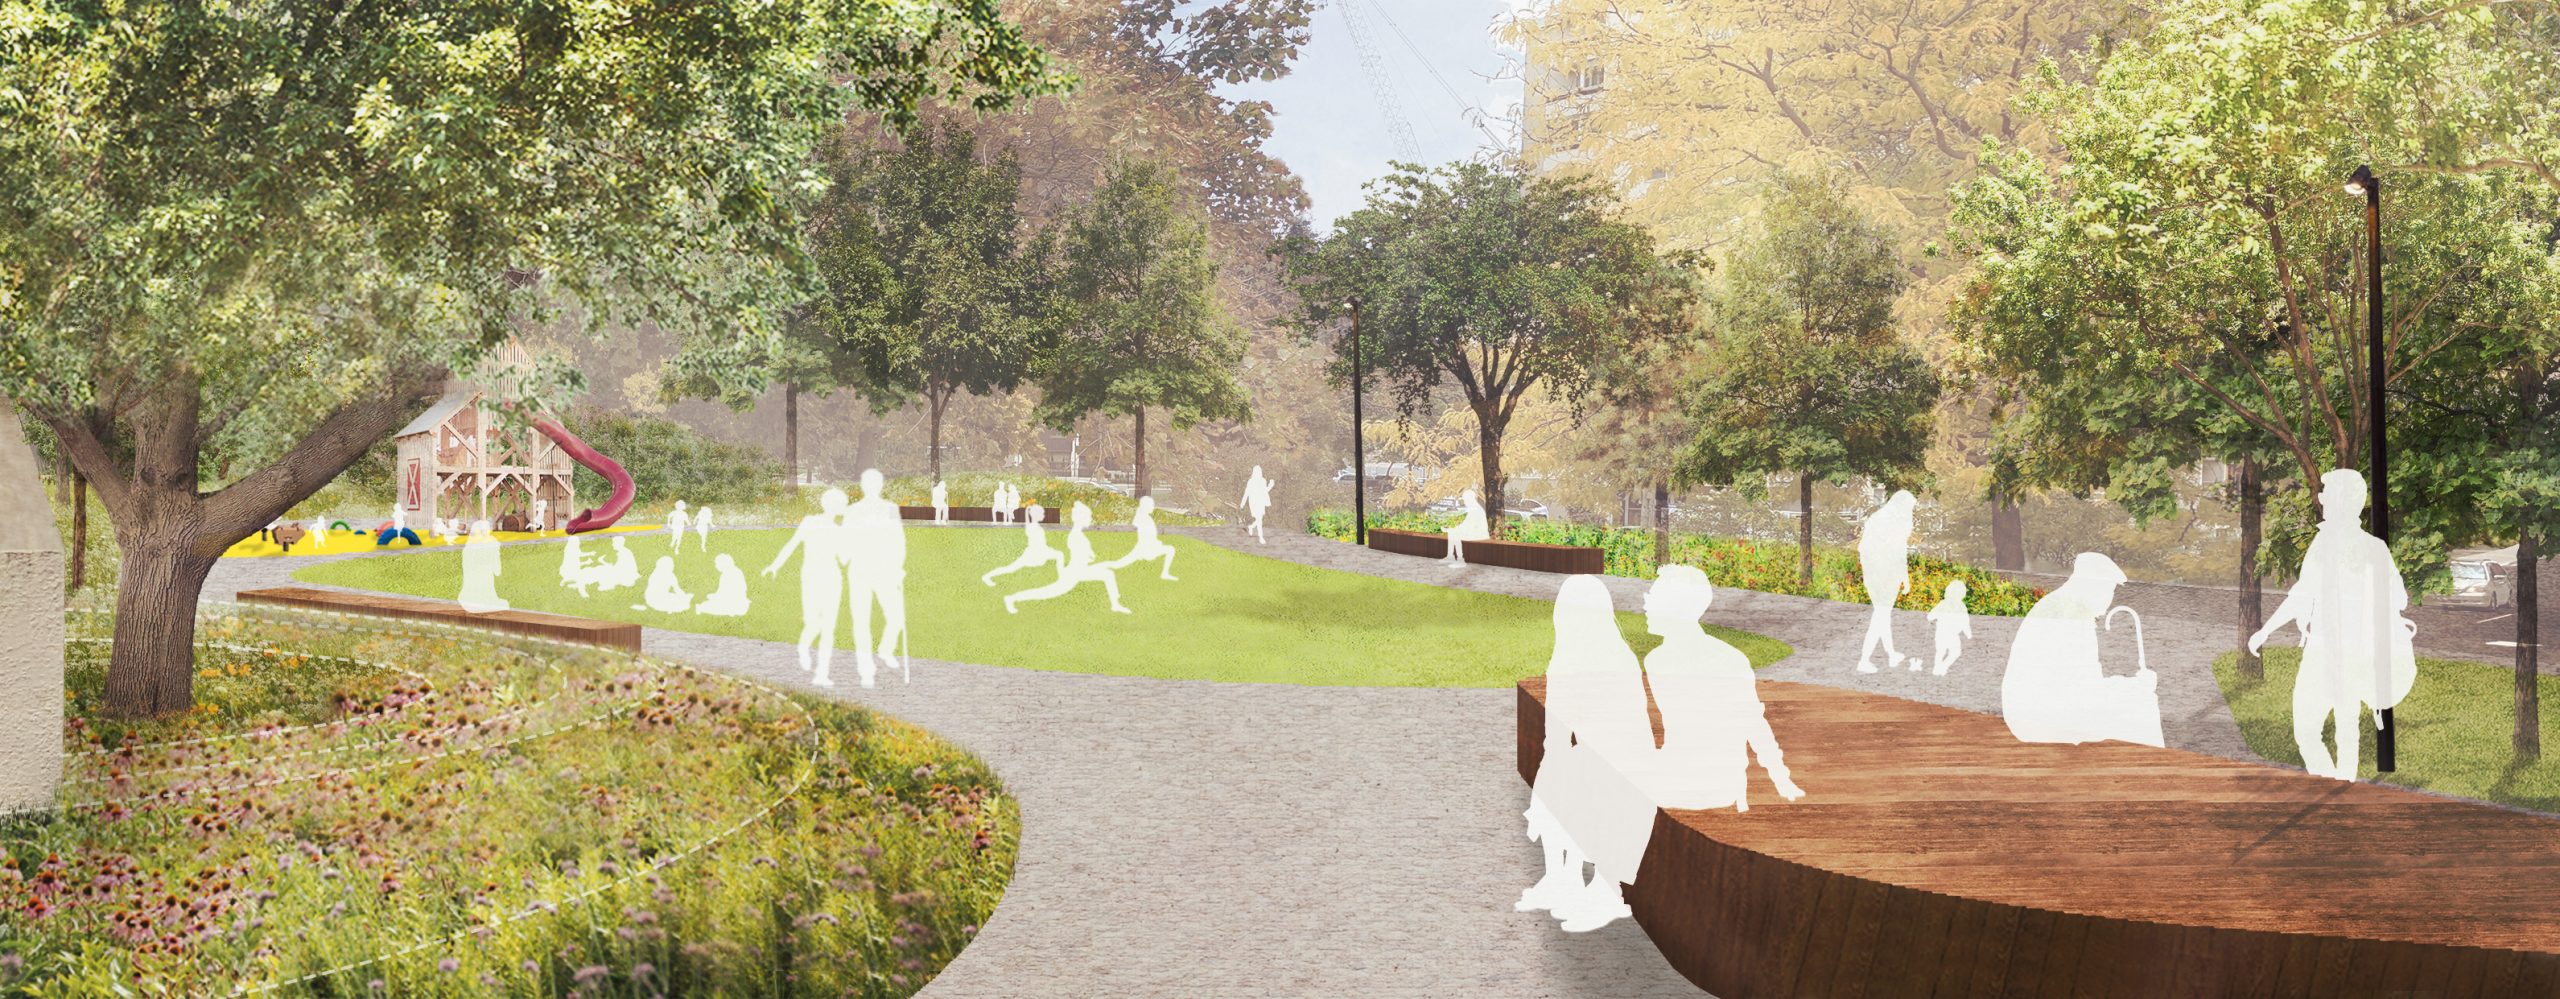 Illustrative image showing the parkette entrance from the north, looking southeast through the parkette. A silhouette of a several people sitting on a platform are on the right observing a raised topography, meadow, and tree to the left. Further into the distance, people are exercising and socializing on an open lawn.